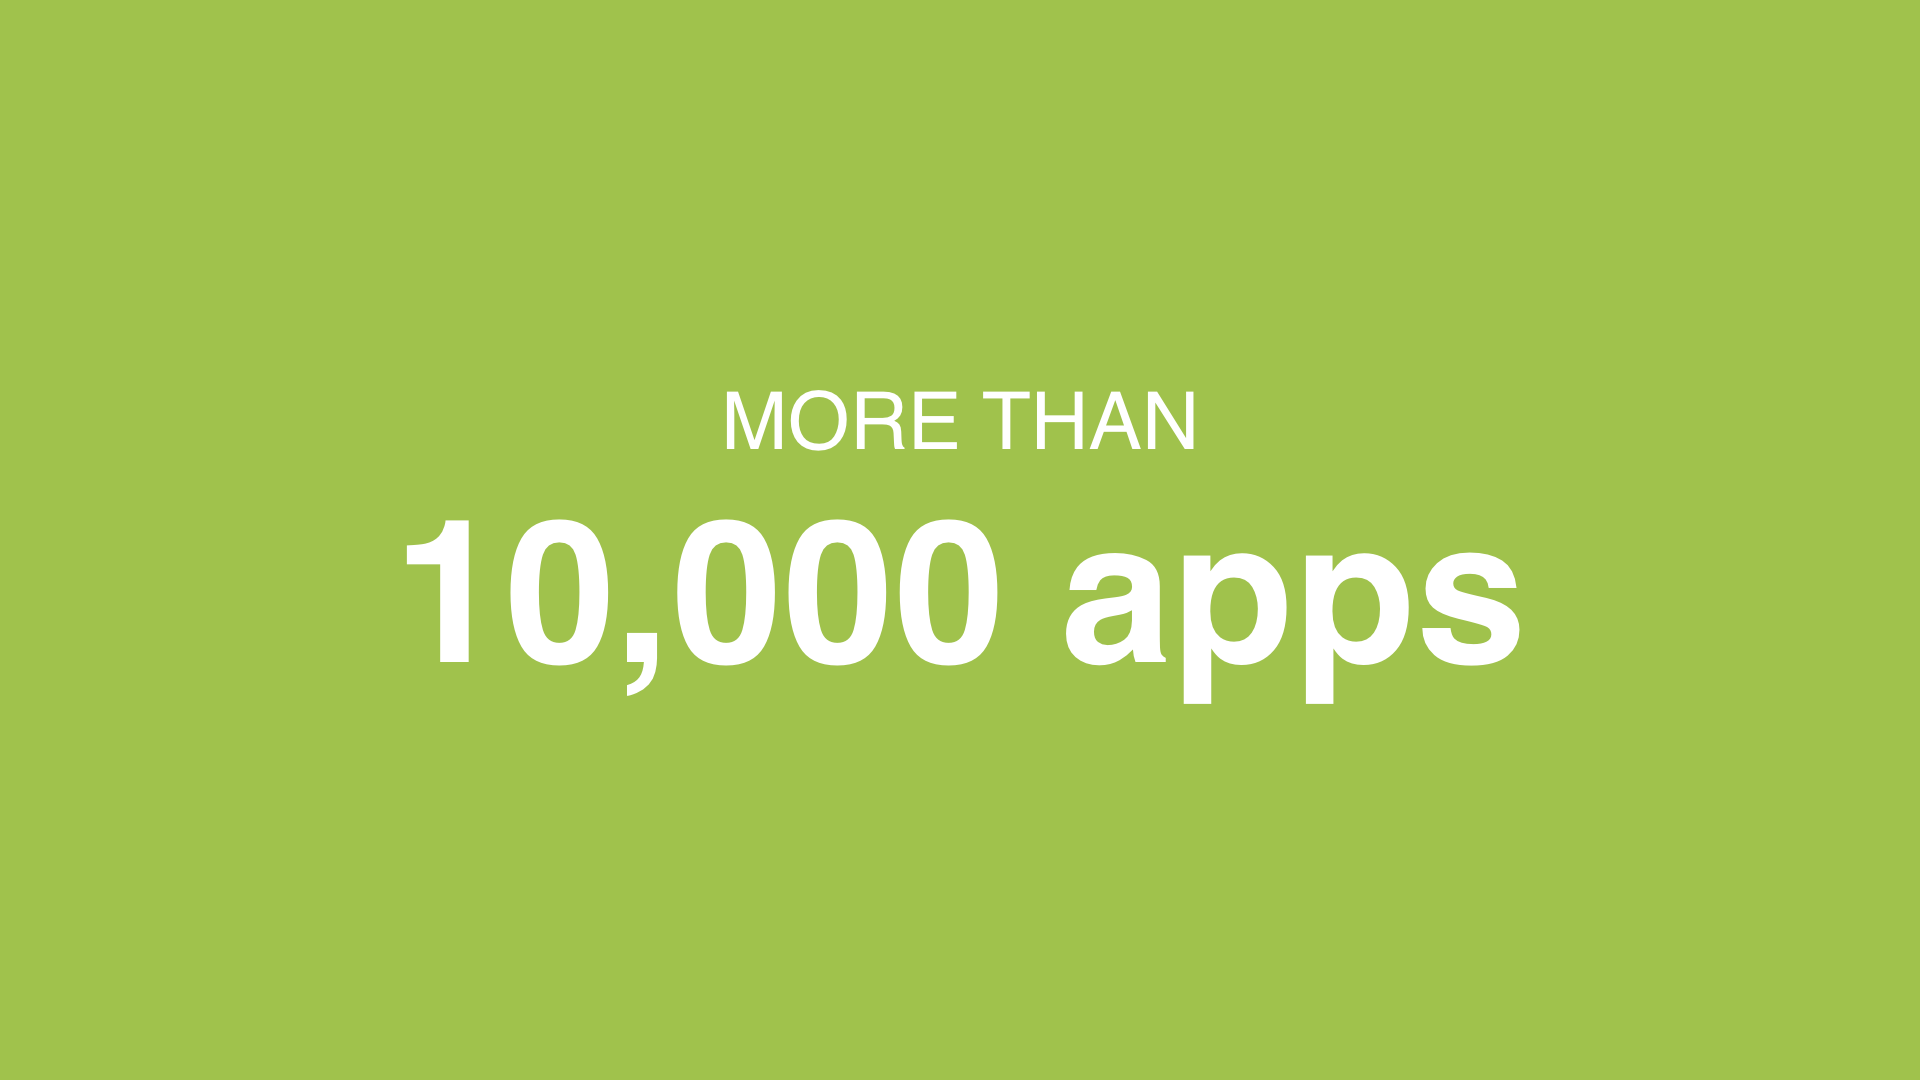 Text: more than 10,000 apps